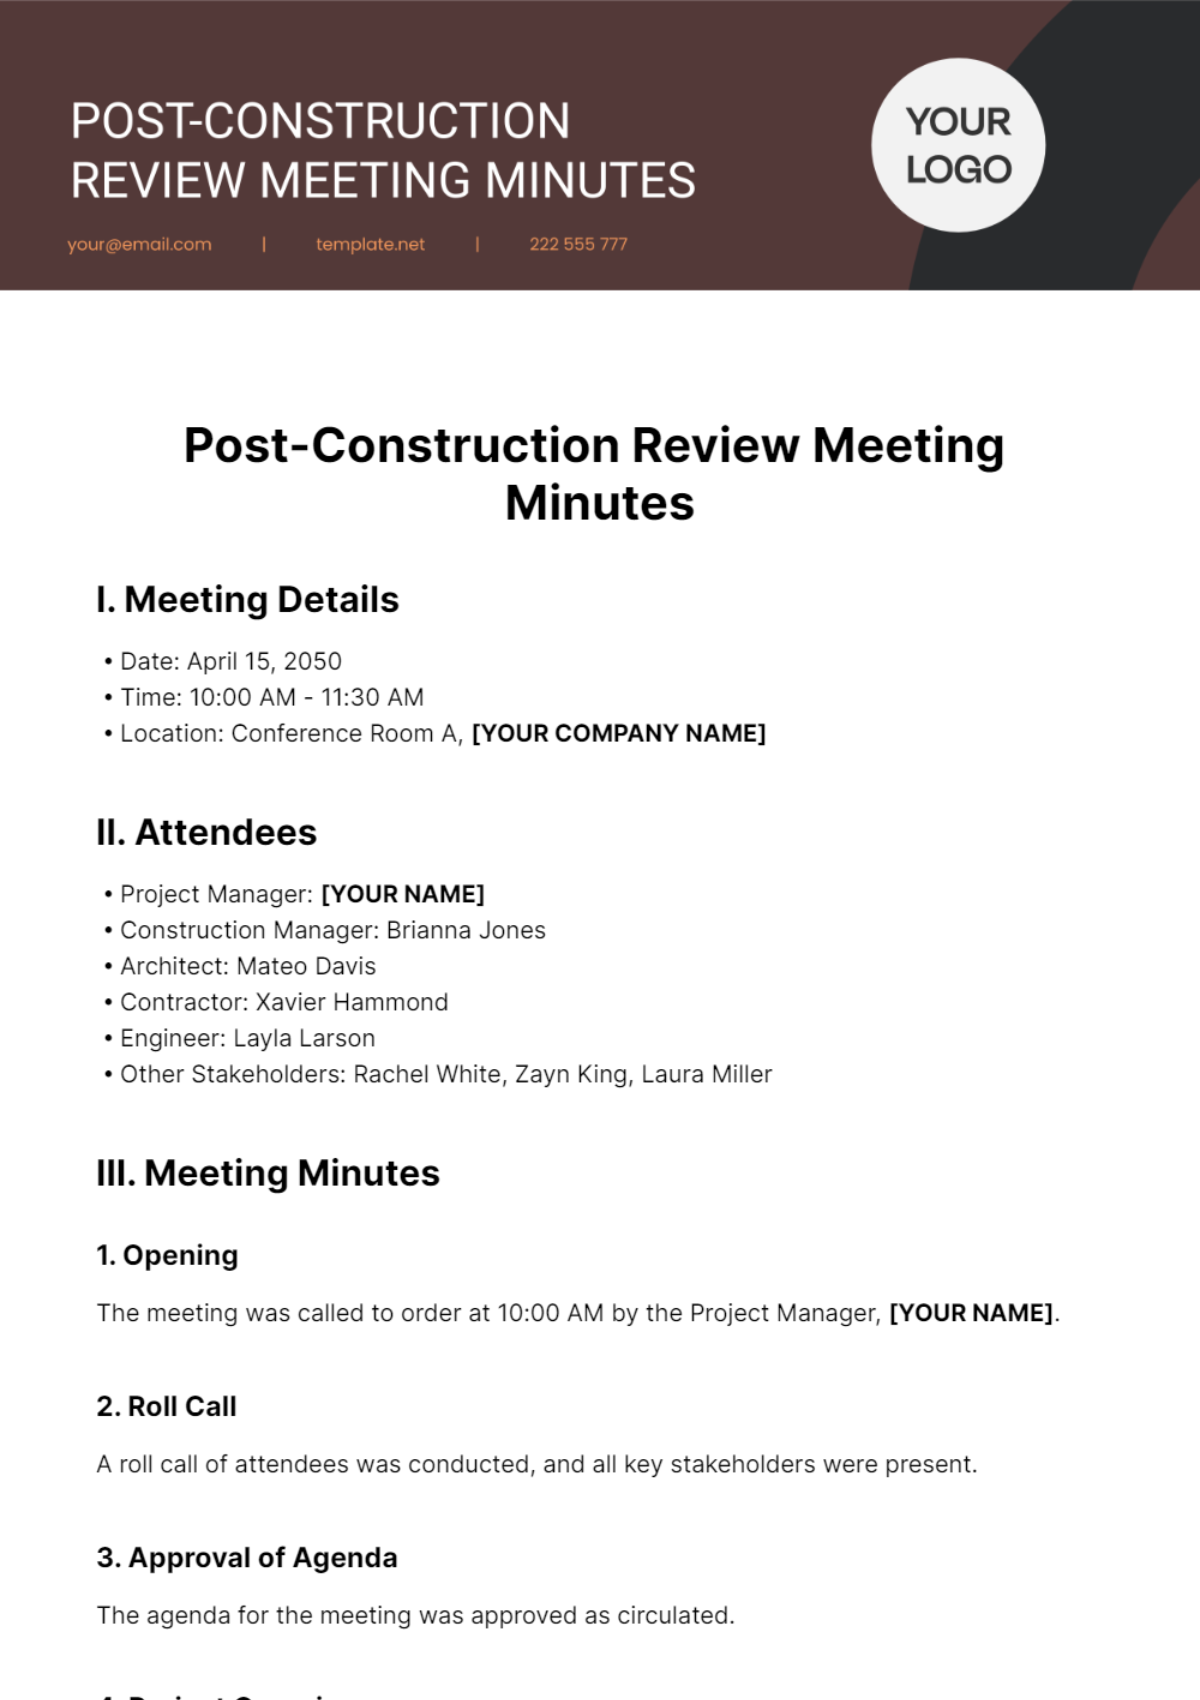 Post-Construction Review Meeting Minutes Template